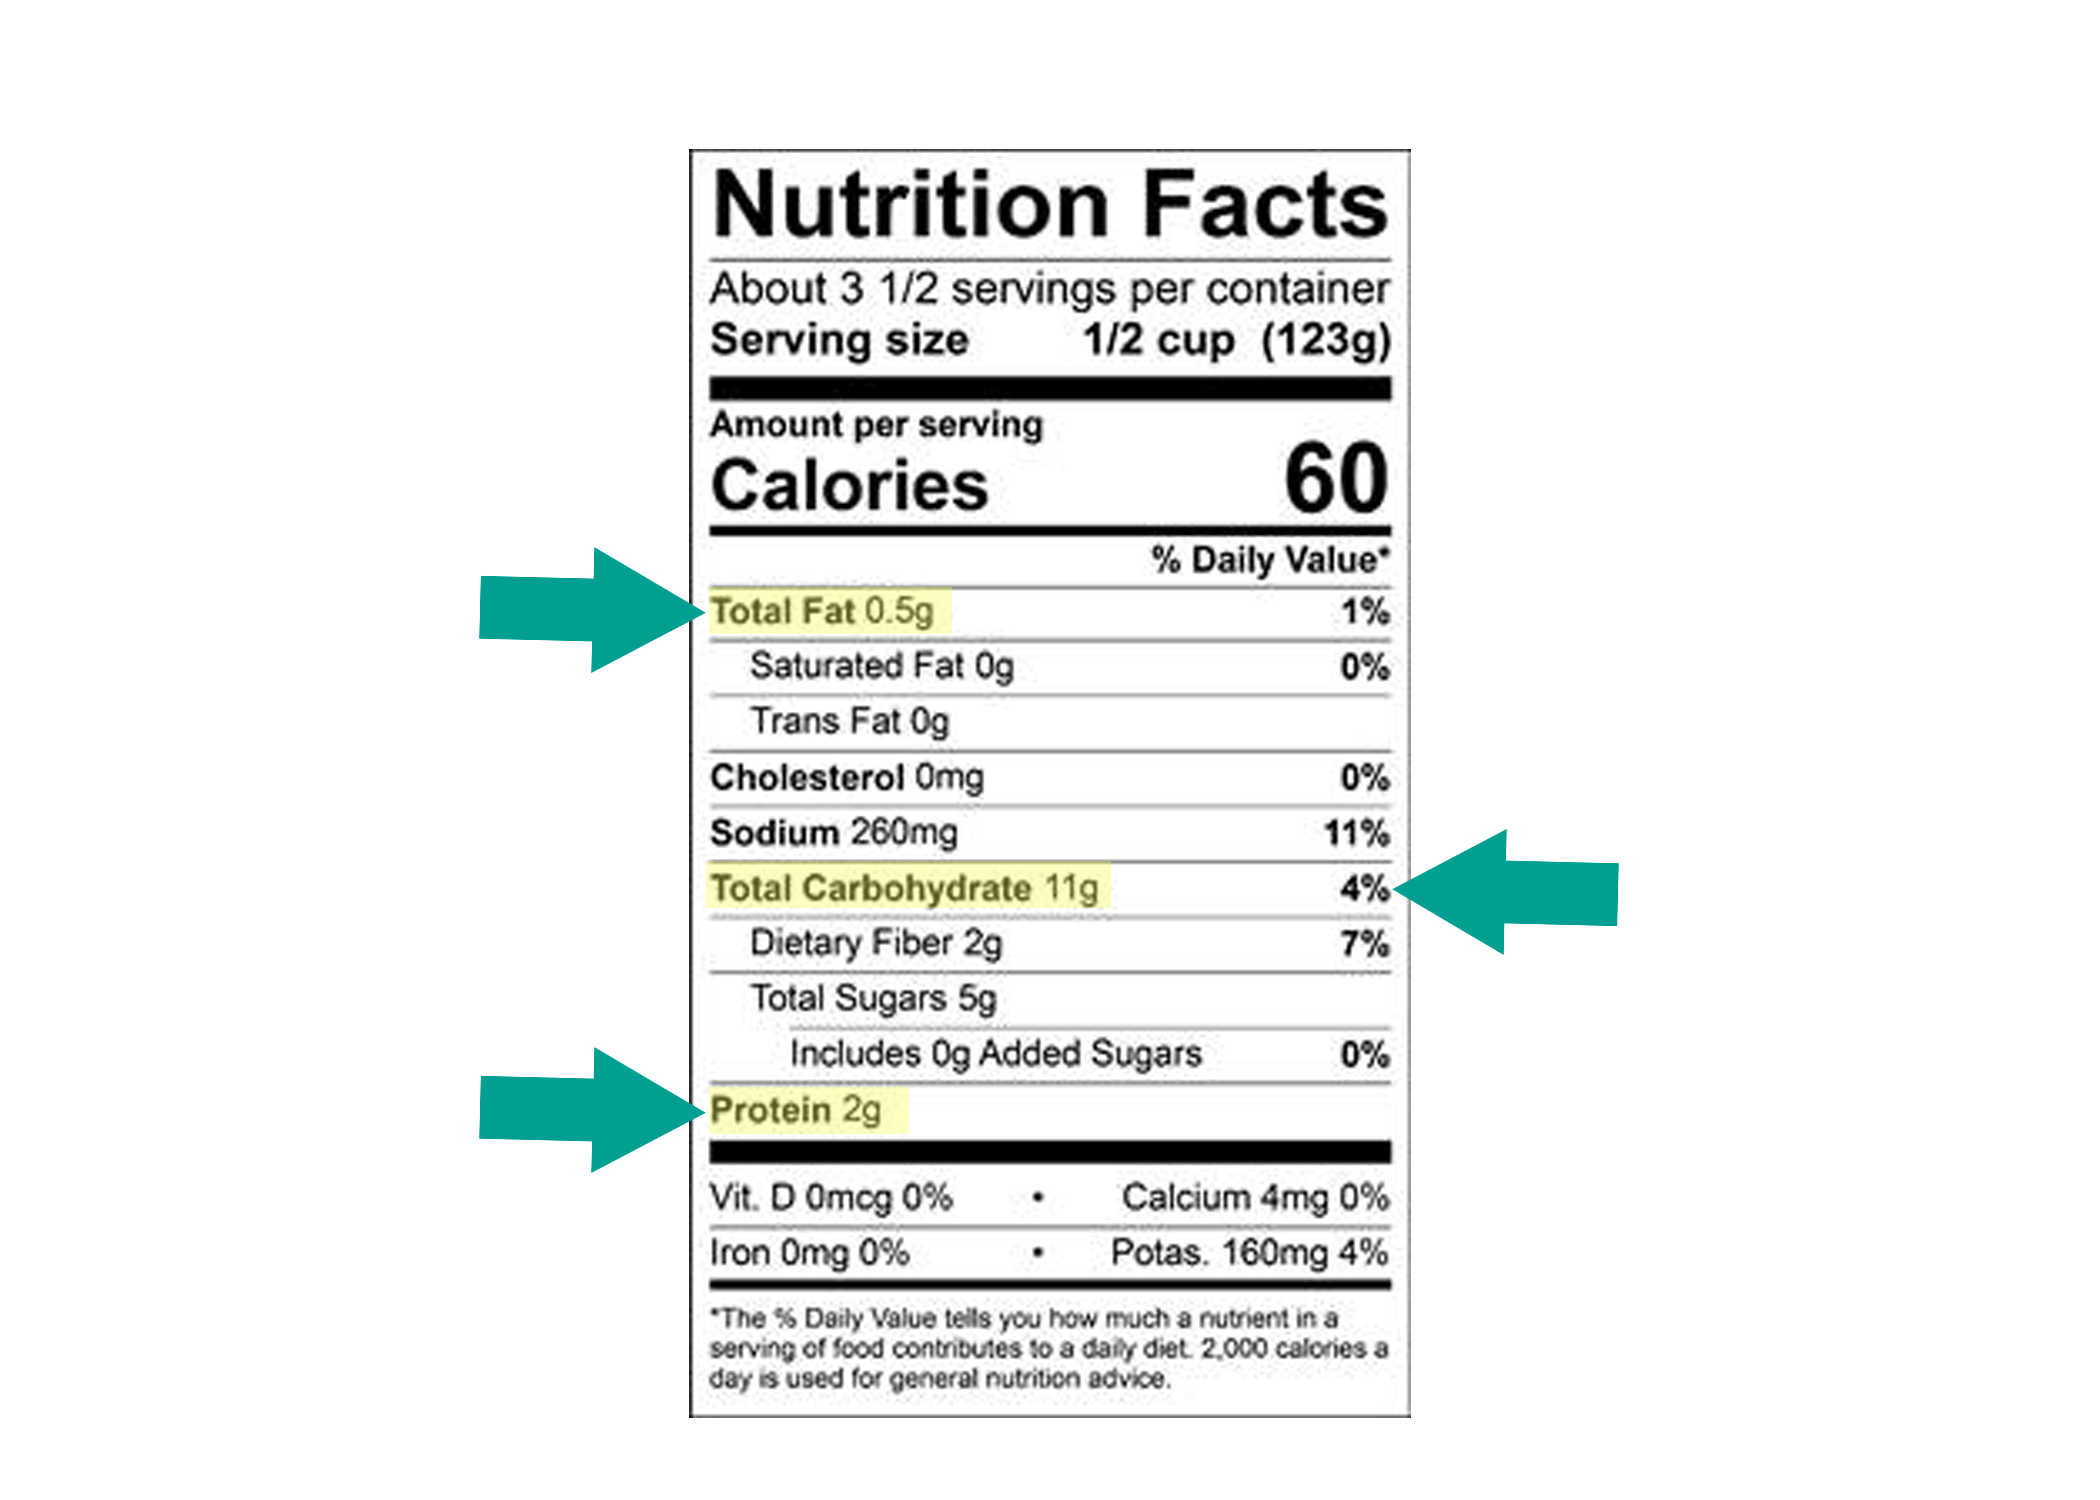 can of corn nutrition label copy